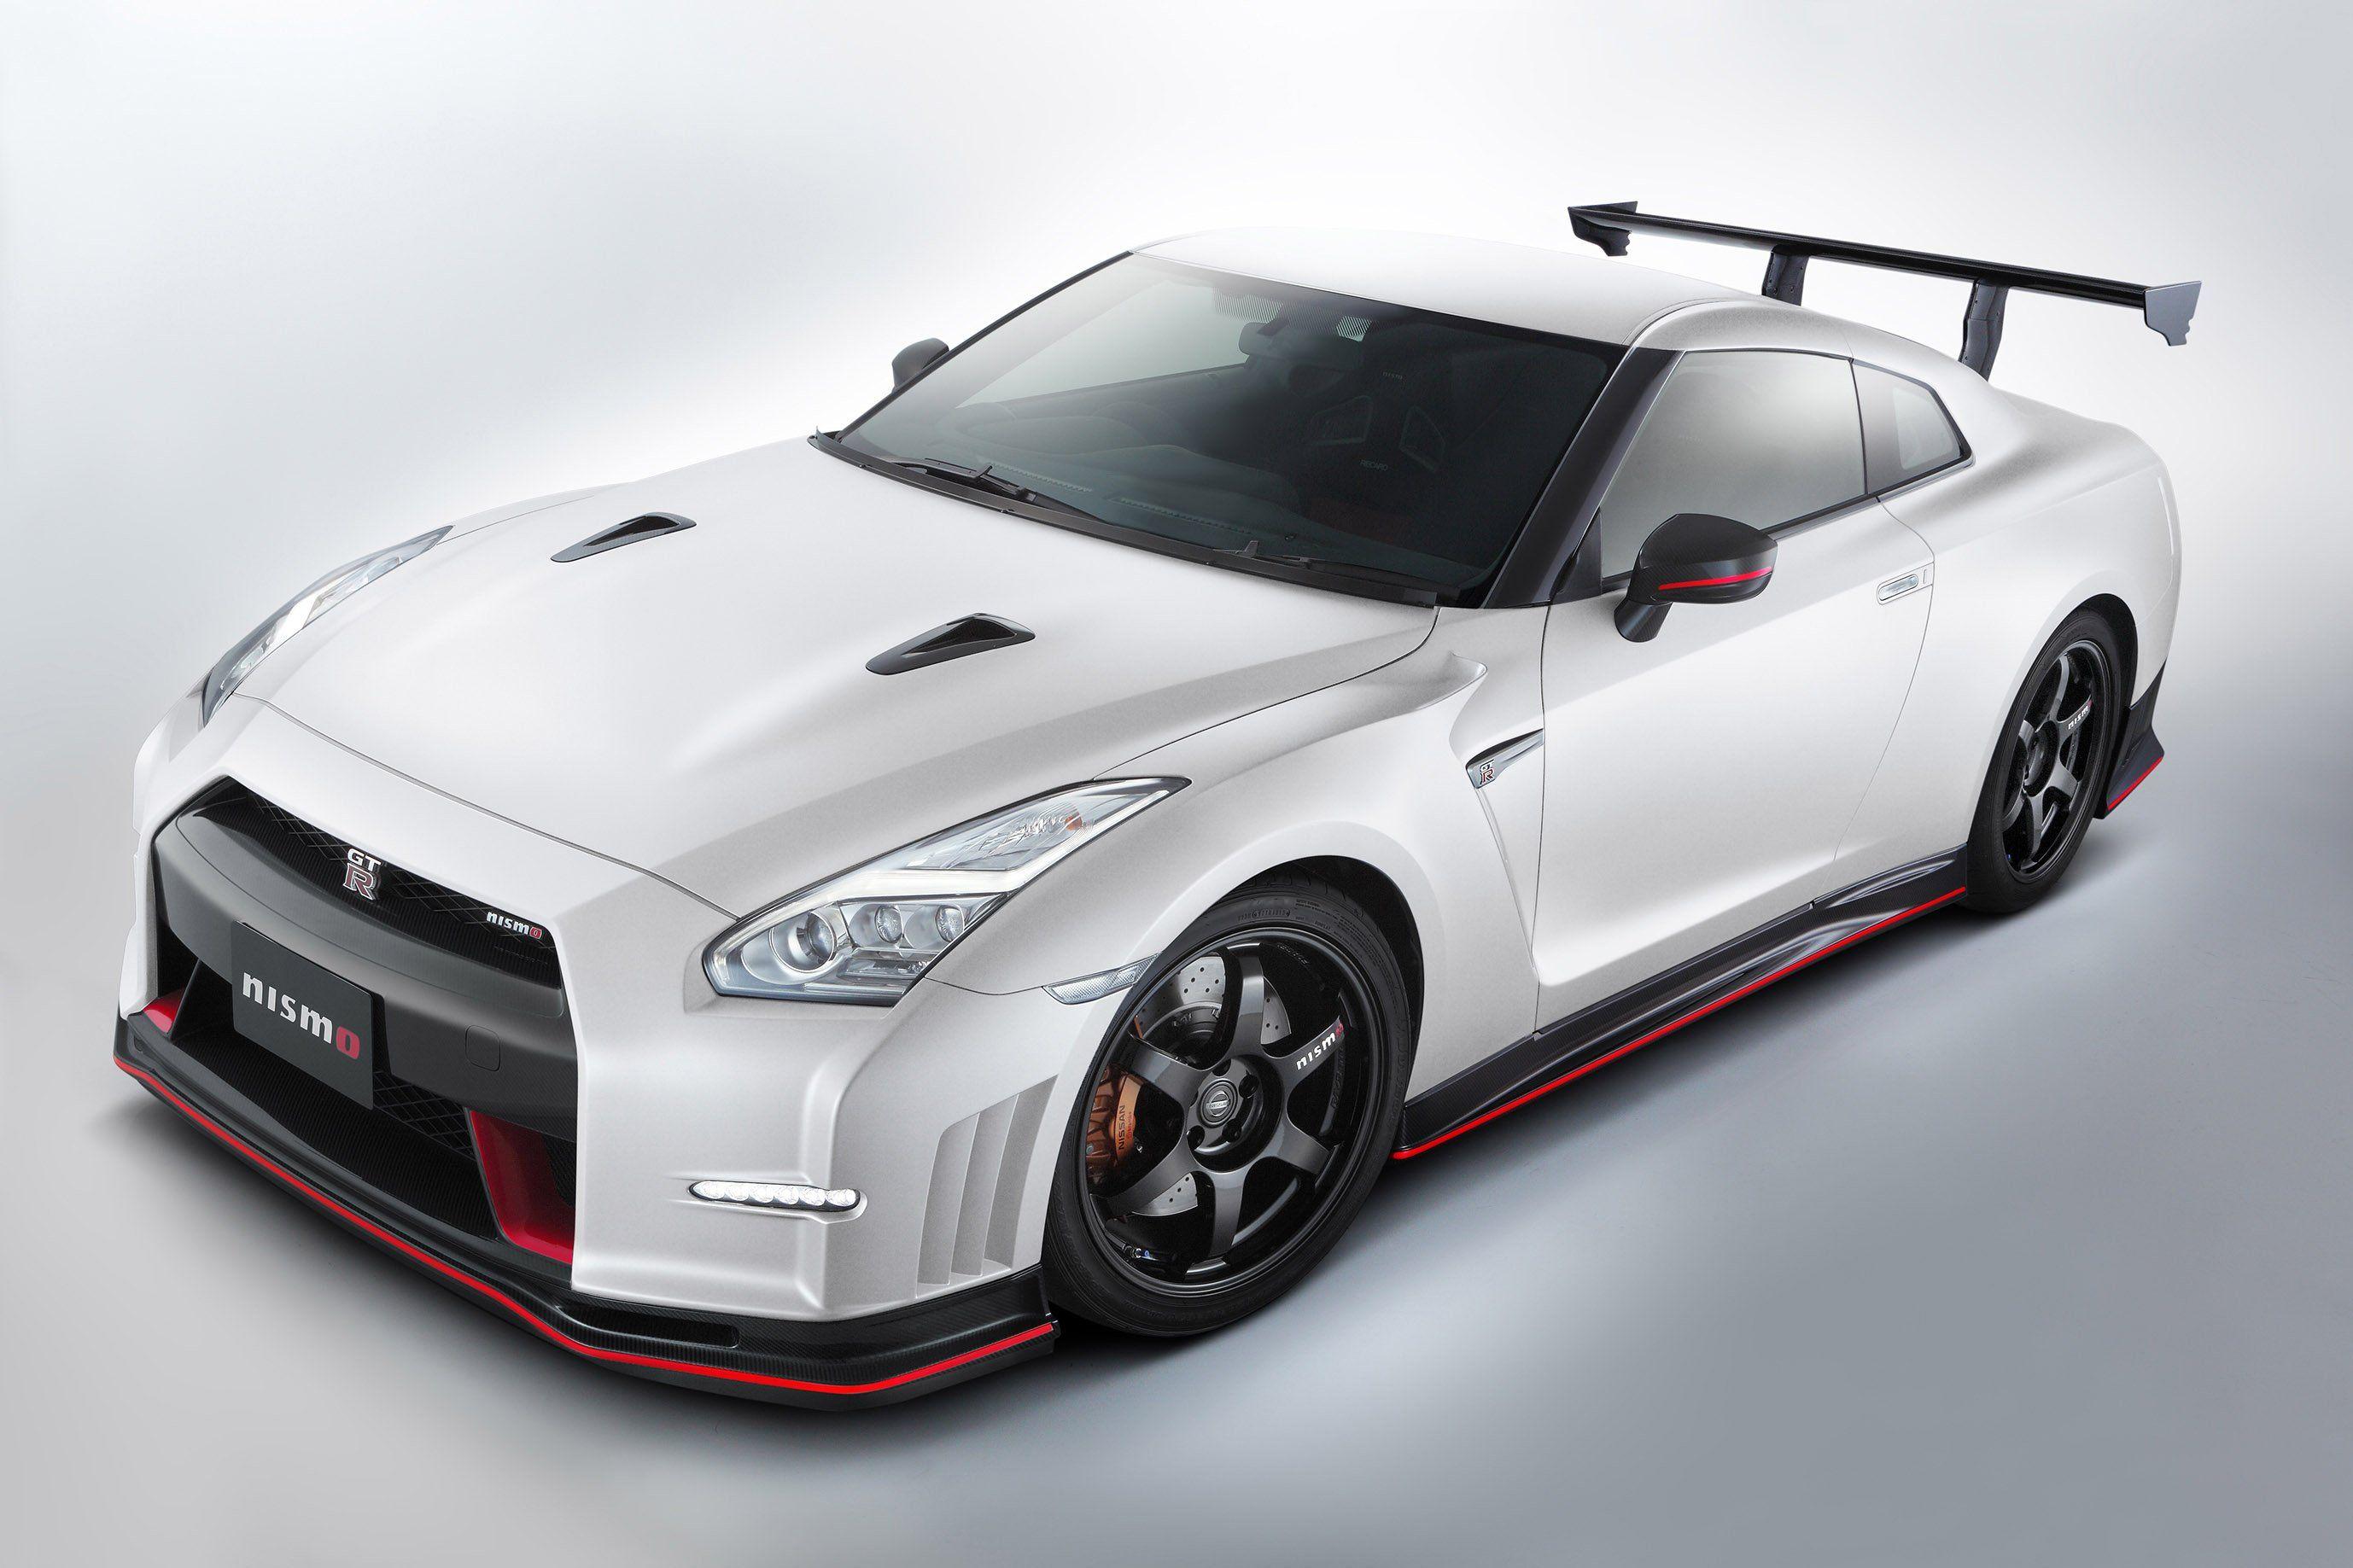 NISSAN GT R NISMO N ATTACK PACKAGE Cars Wallpaperx1837